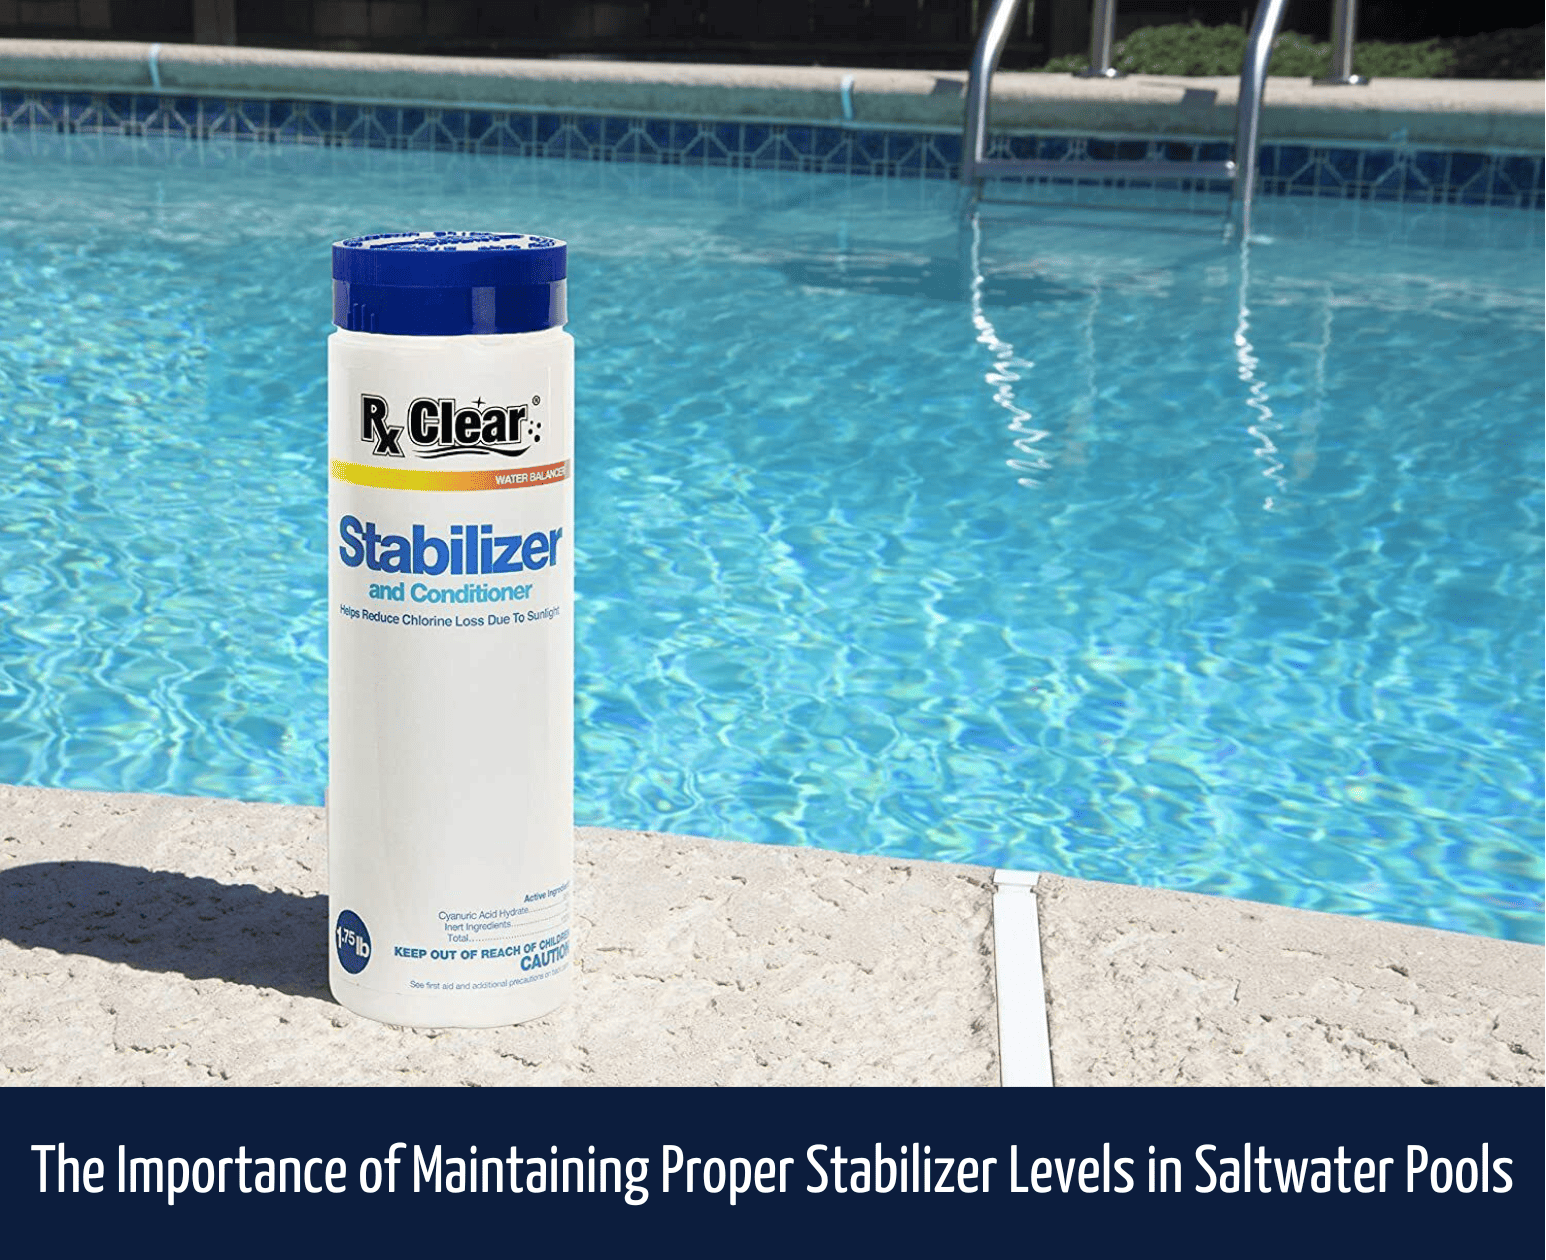 The-Importance-of-Maintaining-Proper-Stabilizer-Levels-in-Saltwater-Pools